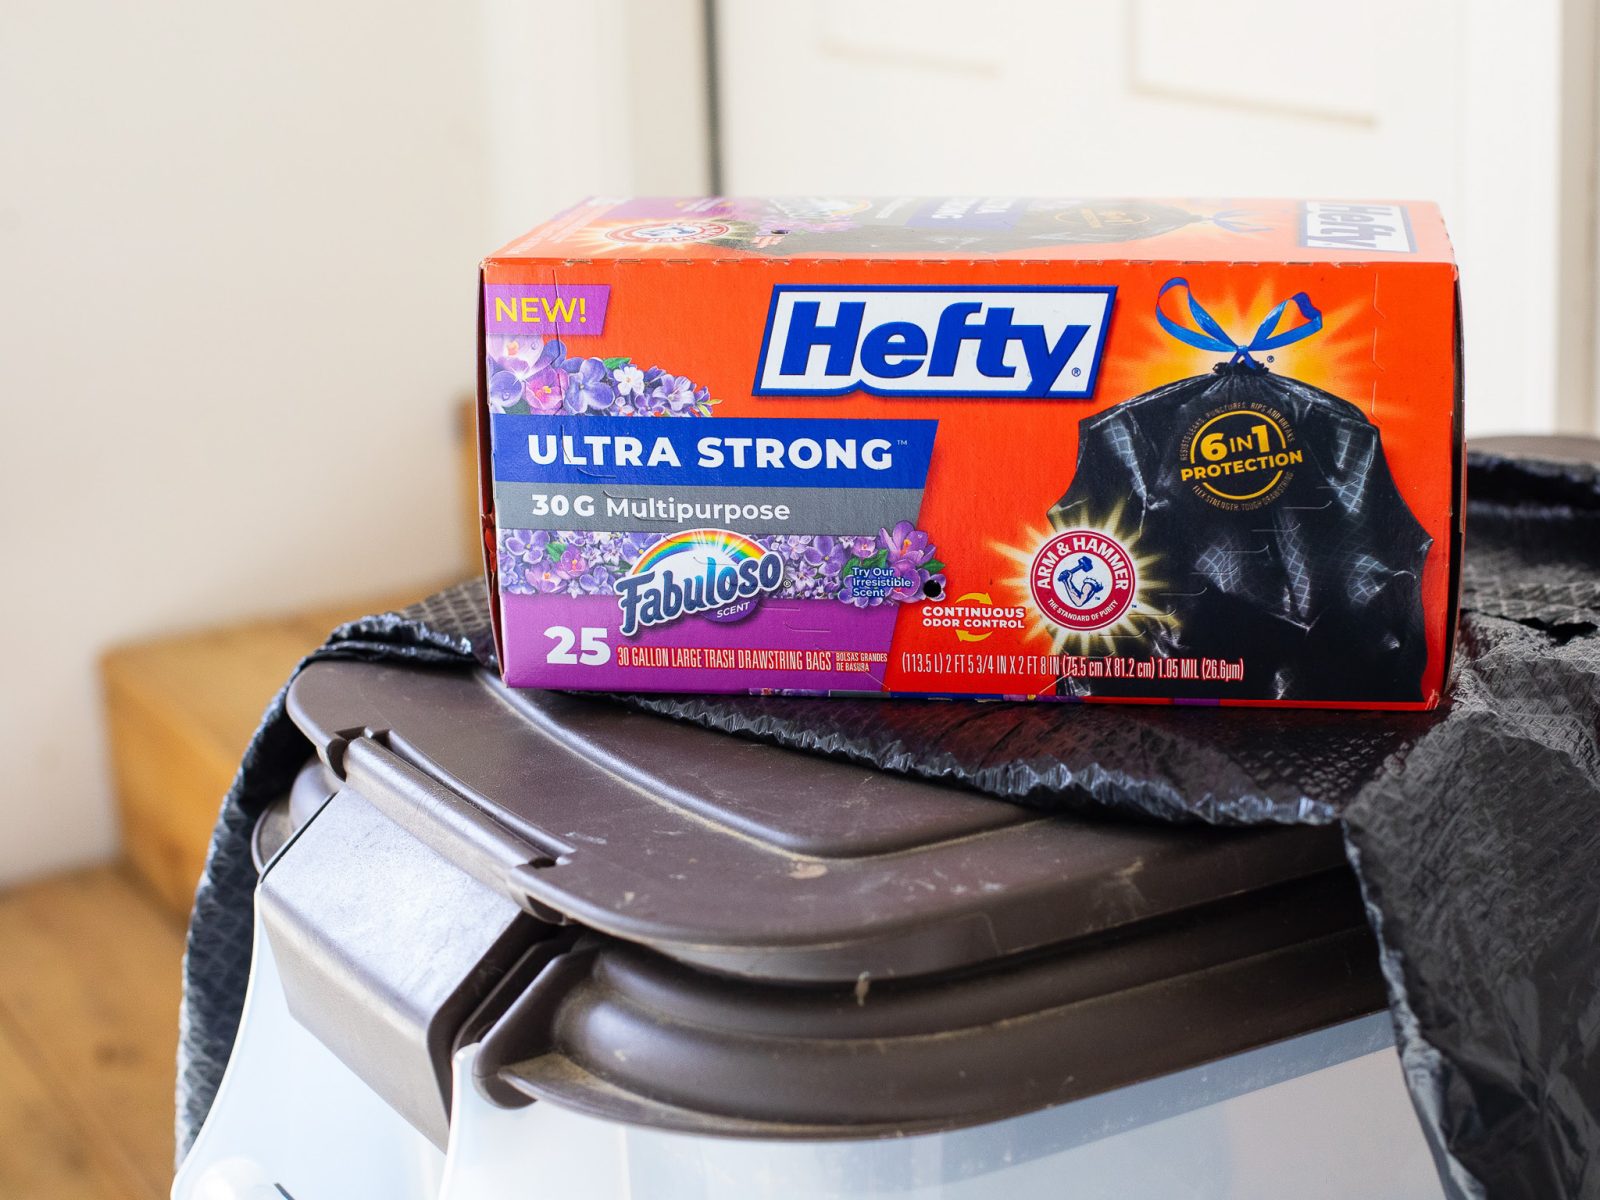 Hefty Trash Bags As Low As $6.69 At Publix – Save $3